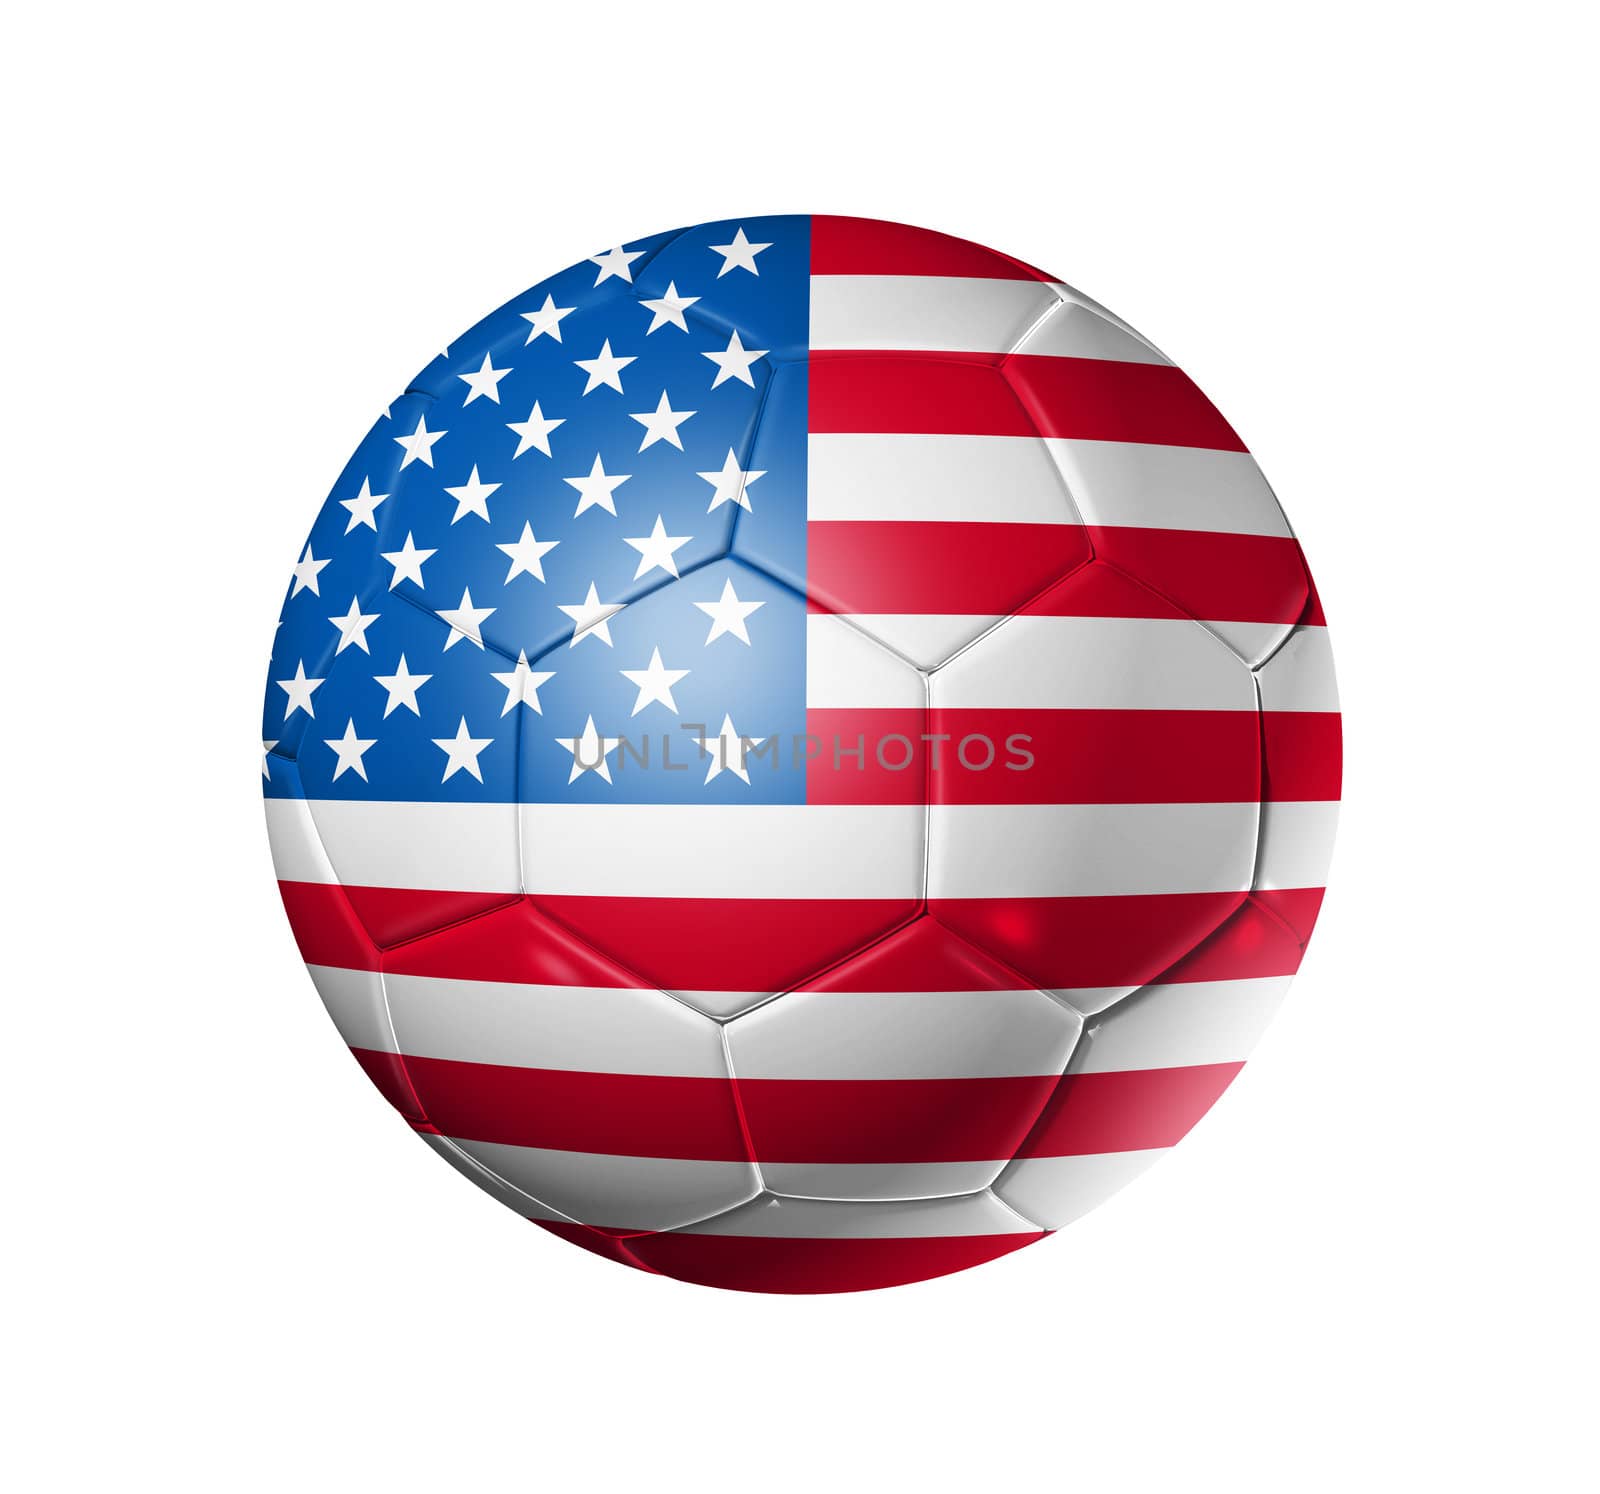 3D soccer ball with USA team flag, world football cup 2010. isolated on white with clipping path